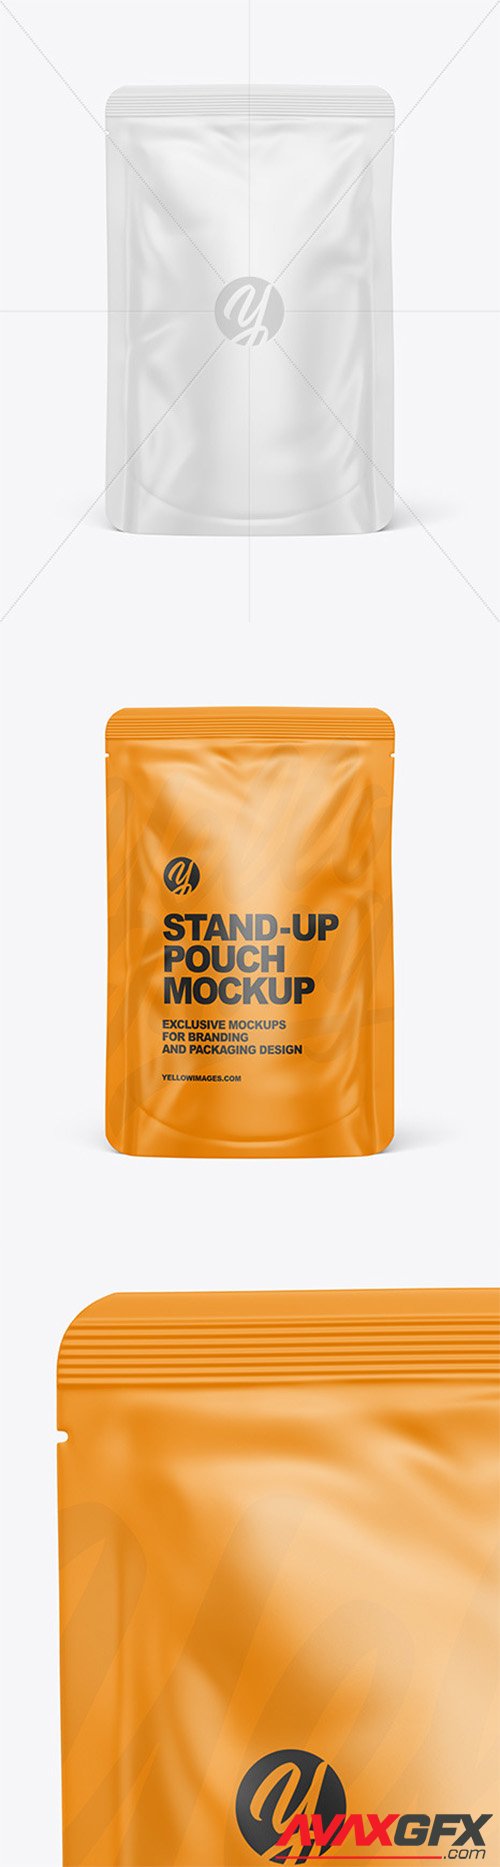 Download Matte Stand Up Pouch Mockup 59337 Avaxgfx All Downloads That You Need In One Place Graphic From Nitroflare Rapidgator Yellowimages Mockups